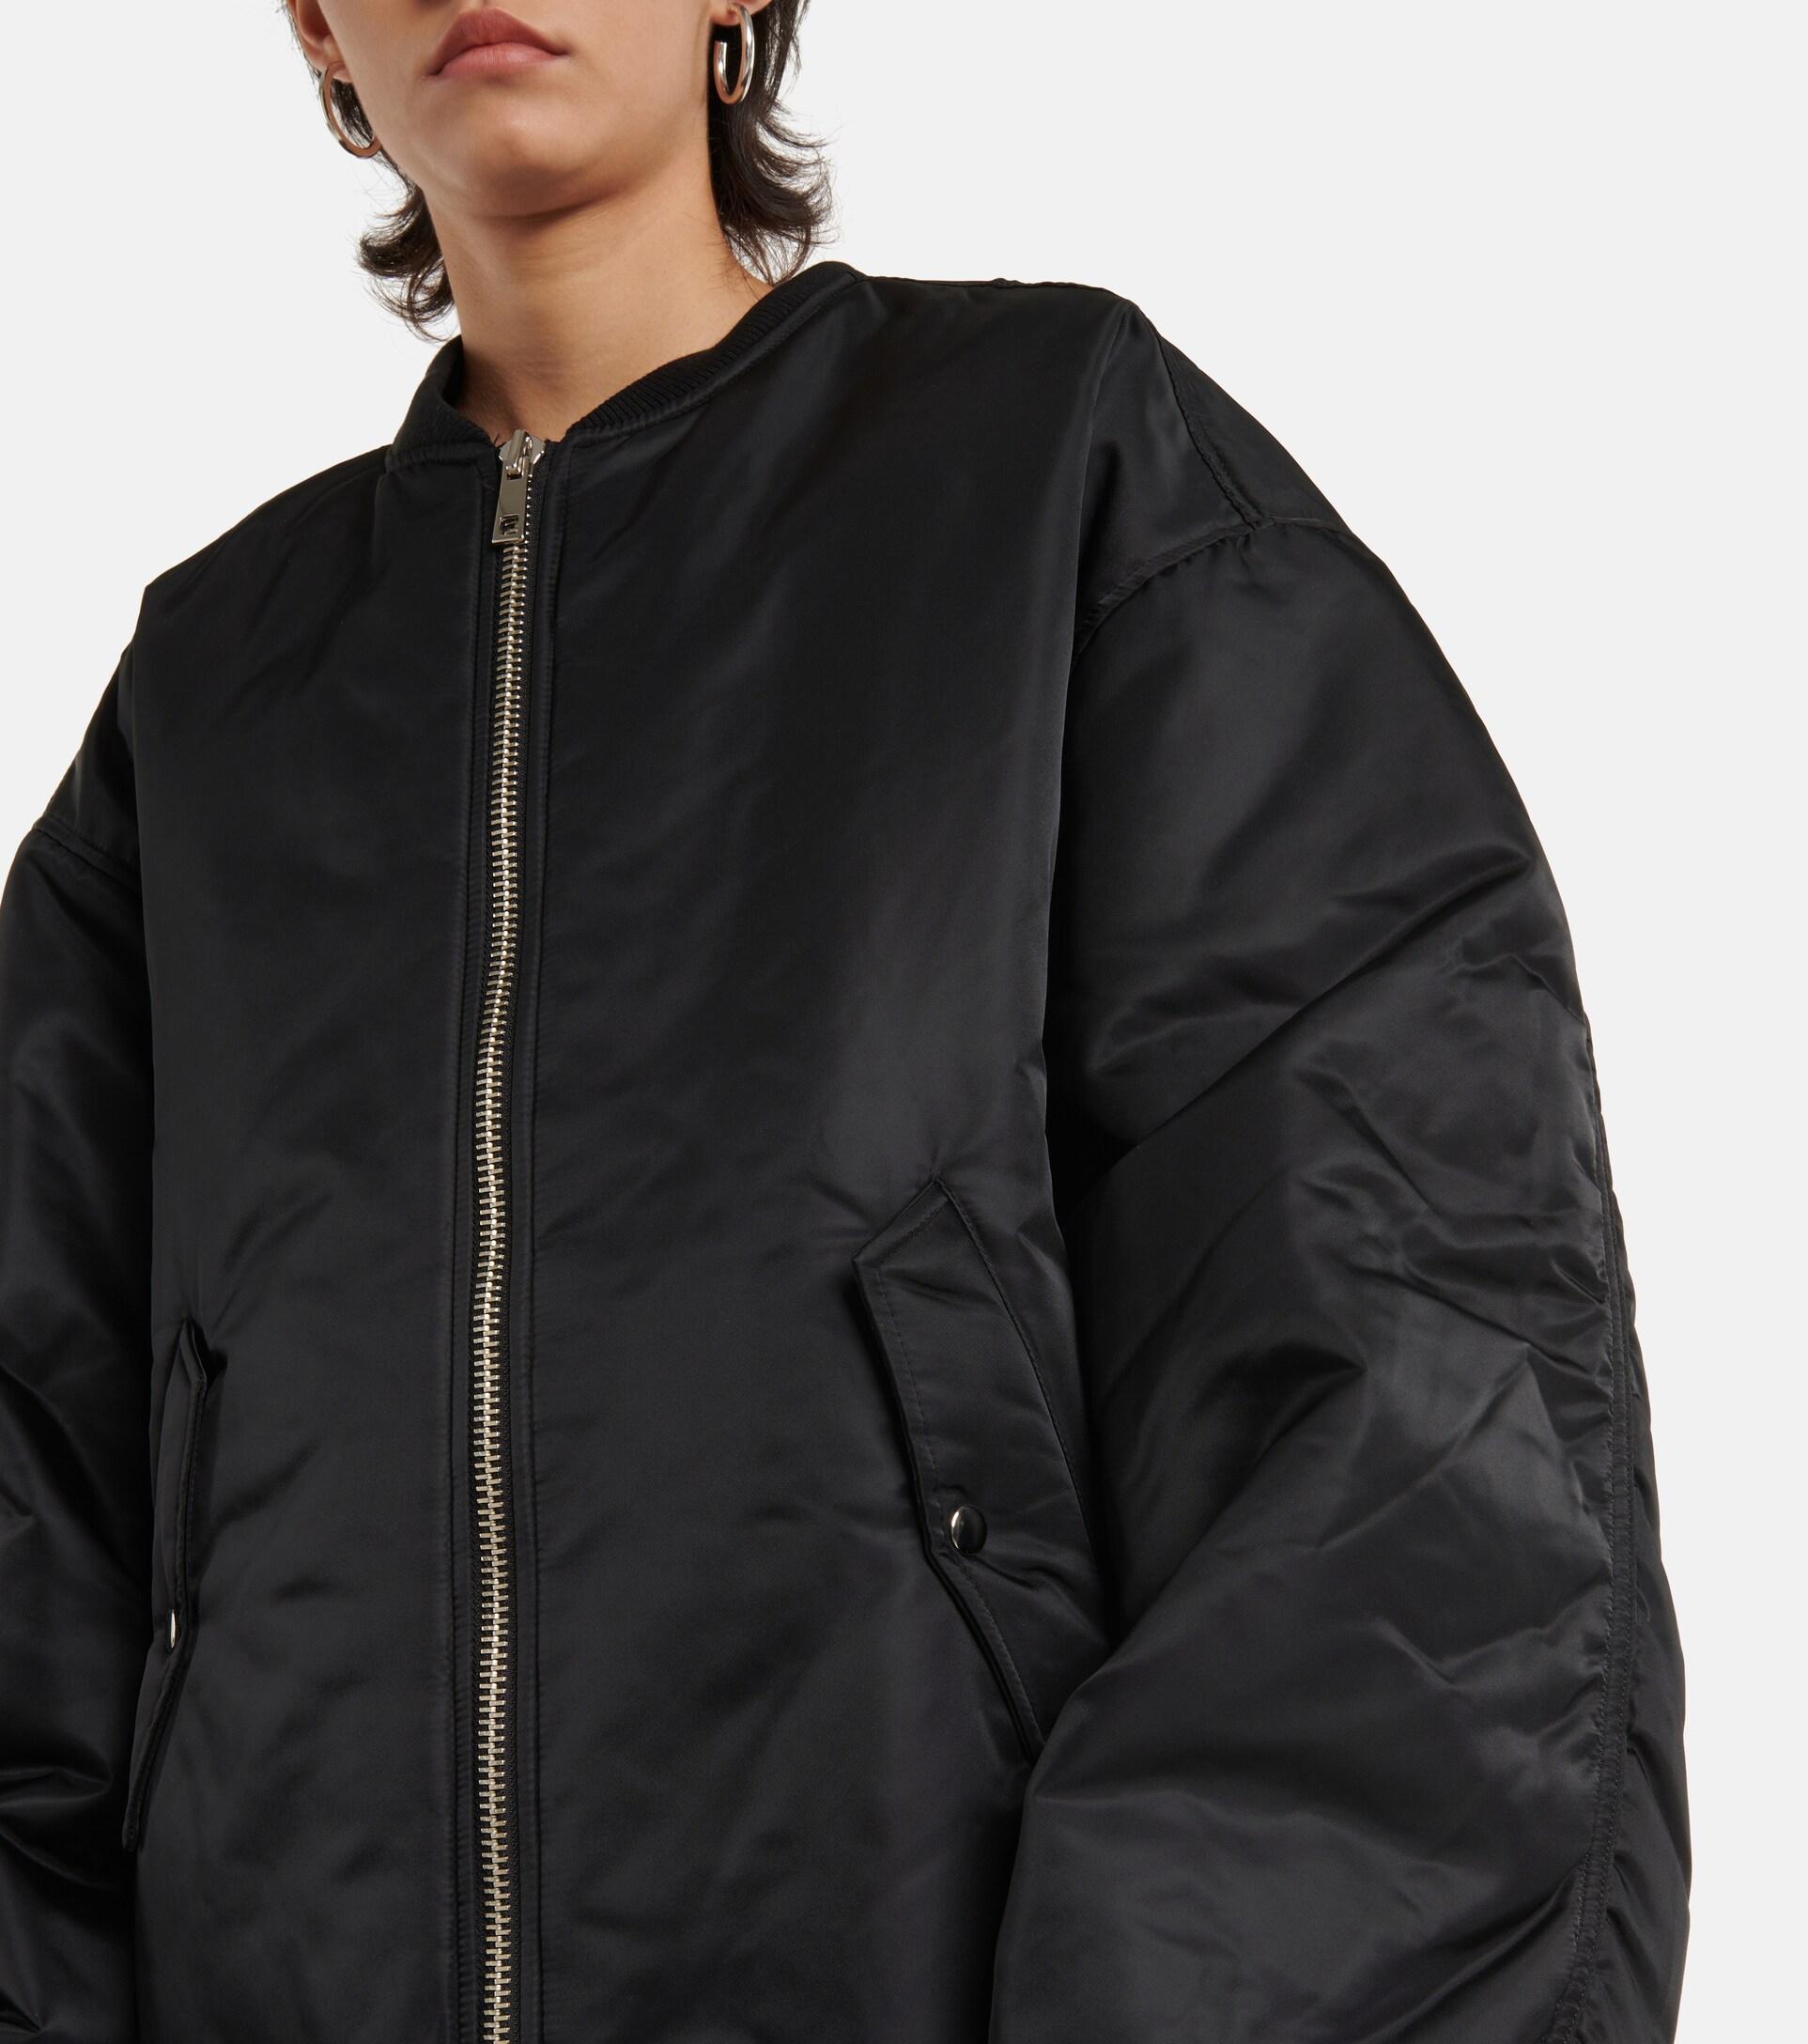 Frankie Shop Astra Technical Bomber Jacket in Black | Lyst